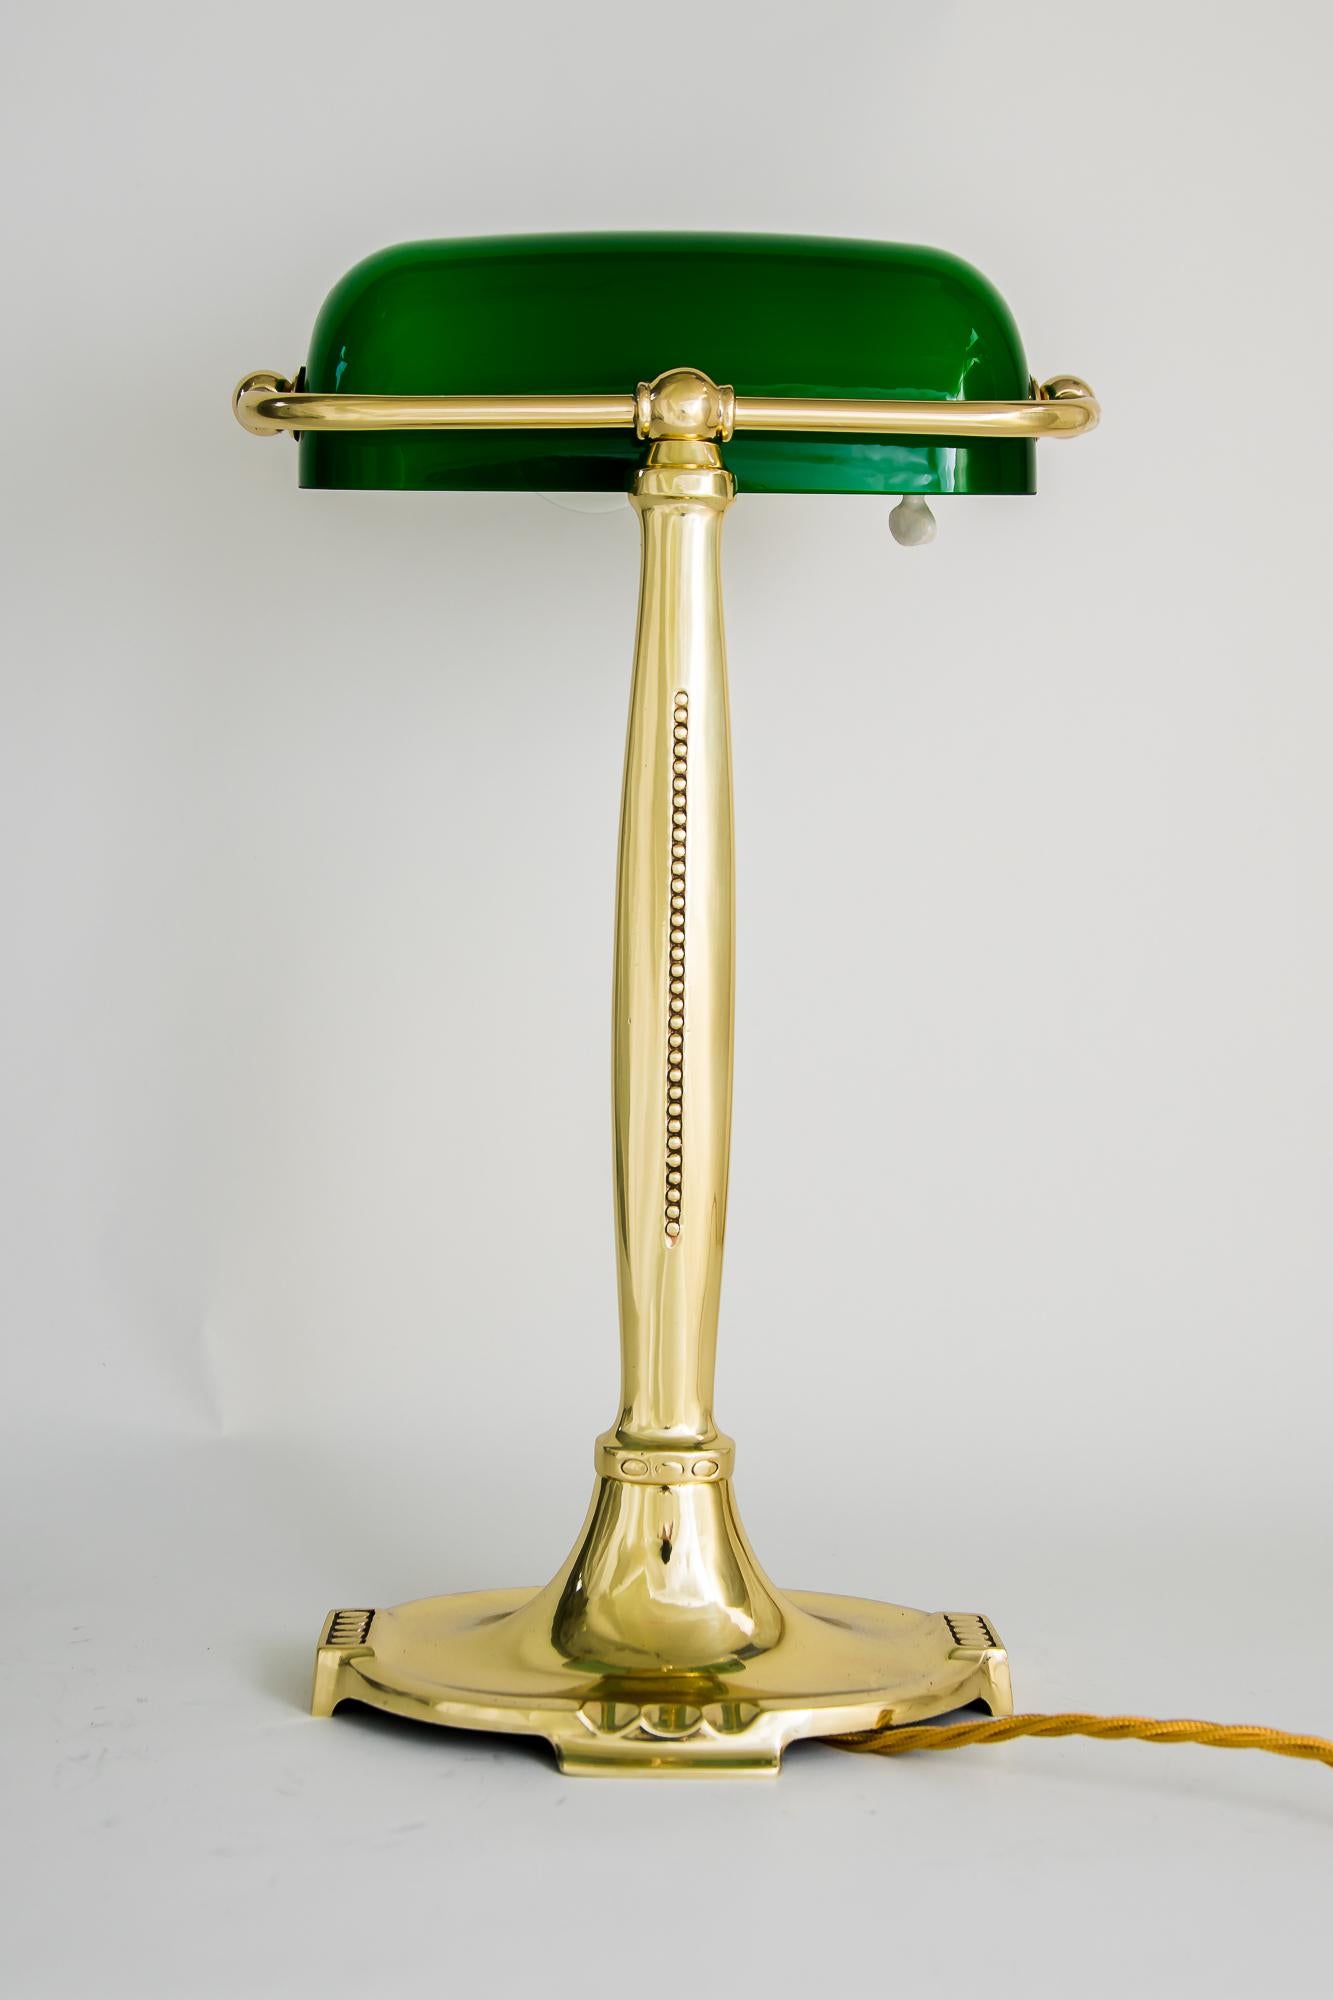 Lacquered Art Deco Table Lamp with Original Green Shade, Vienna, Around 1920s